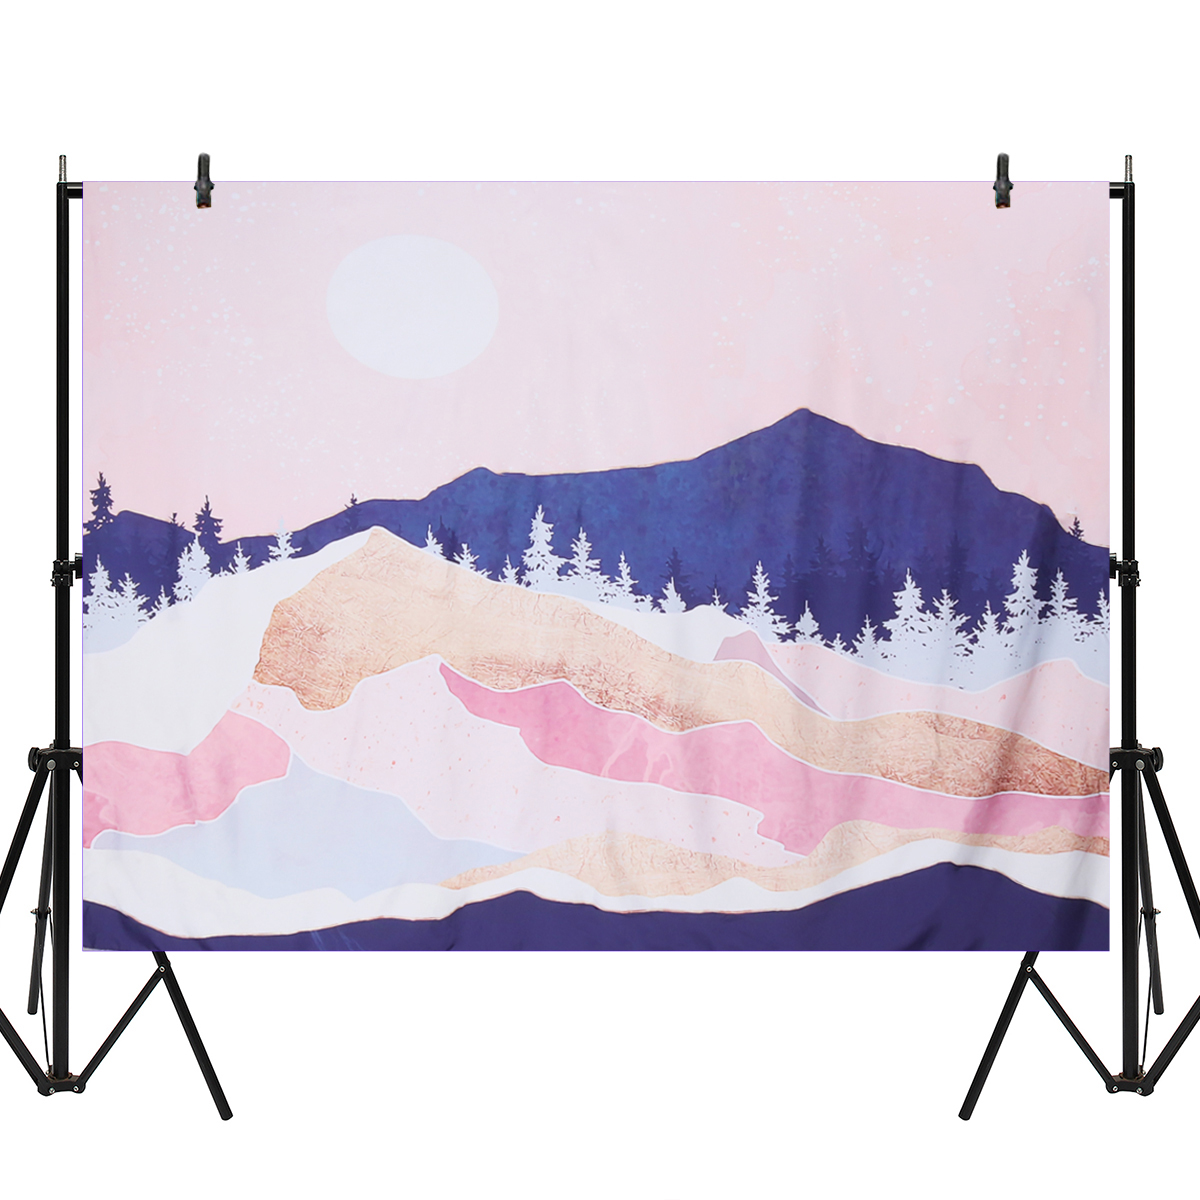 150130CM-Reusable-Photography-Backdrop-Fabric-Mat-Cloth-for-Studio-Photo-Background-Screen-Pad-1838149-12